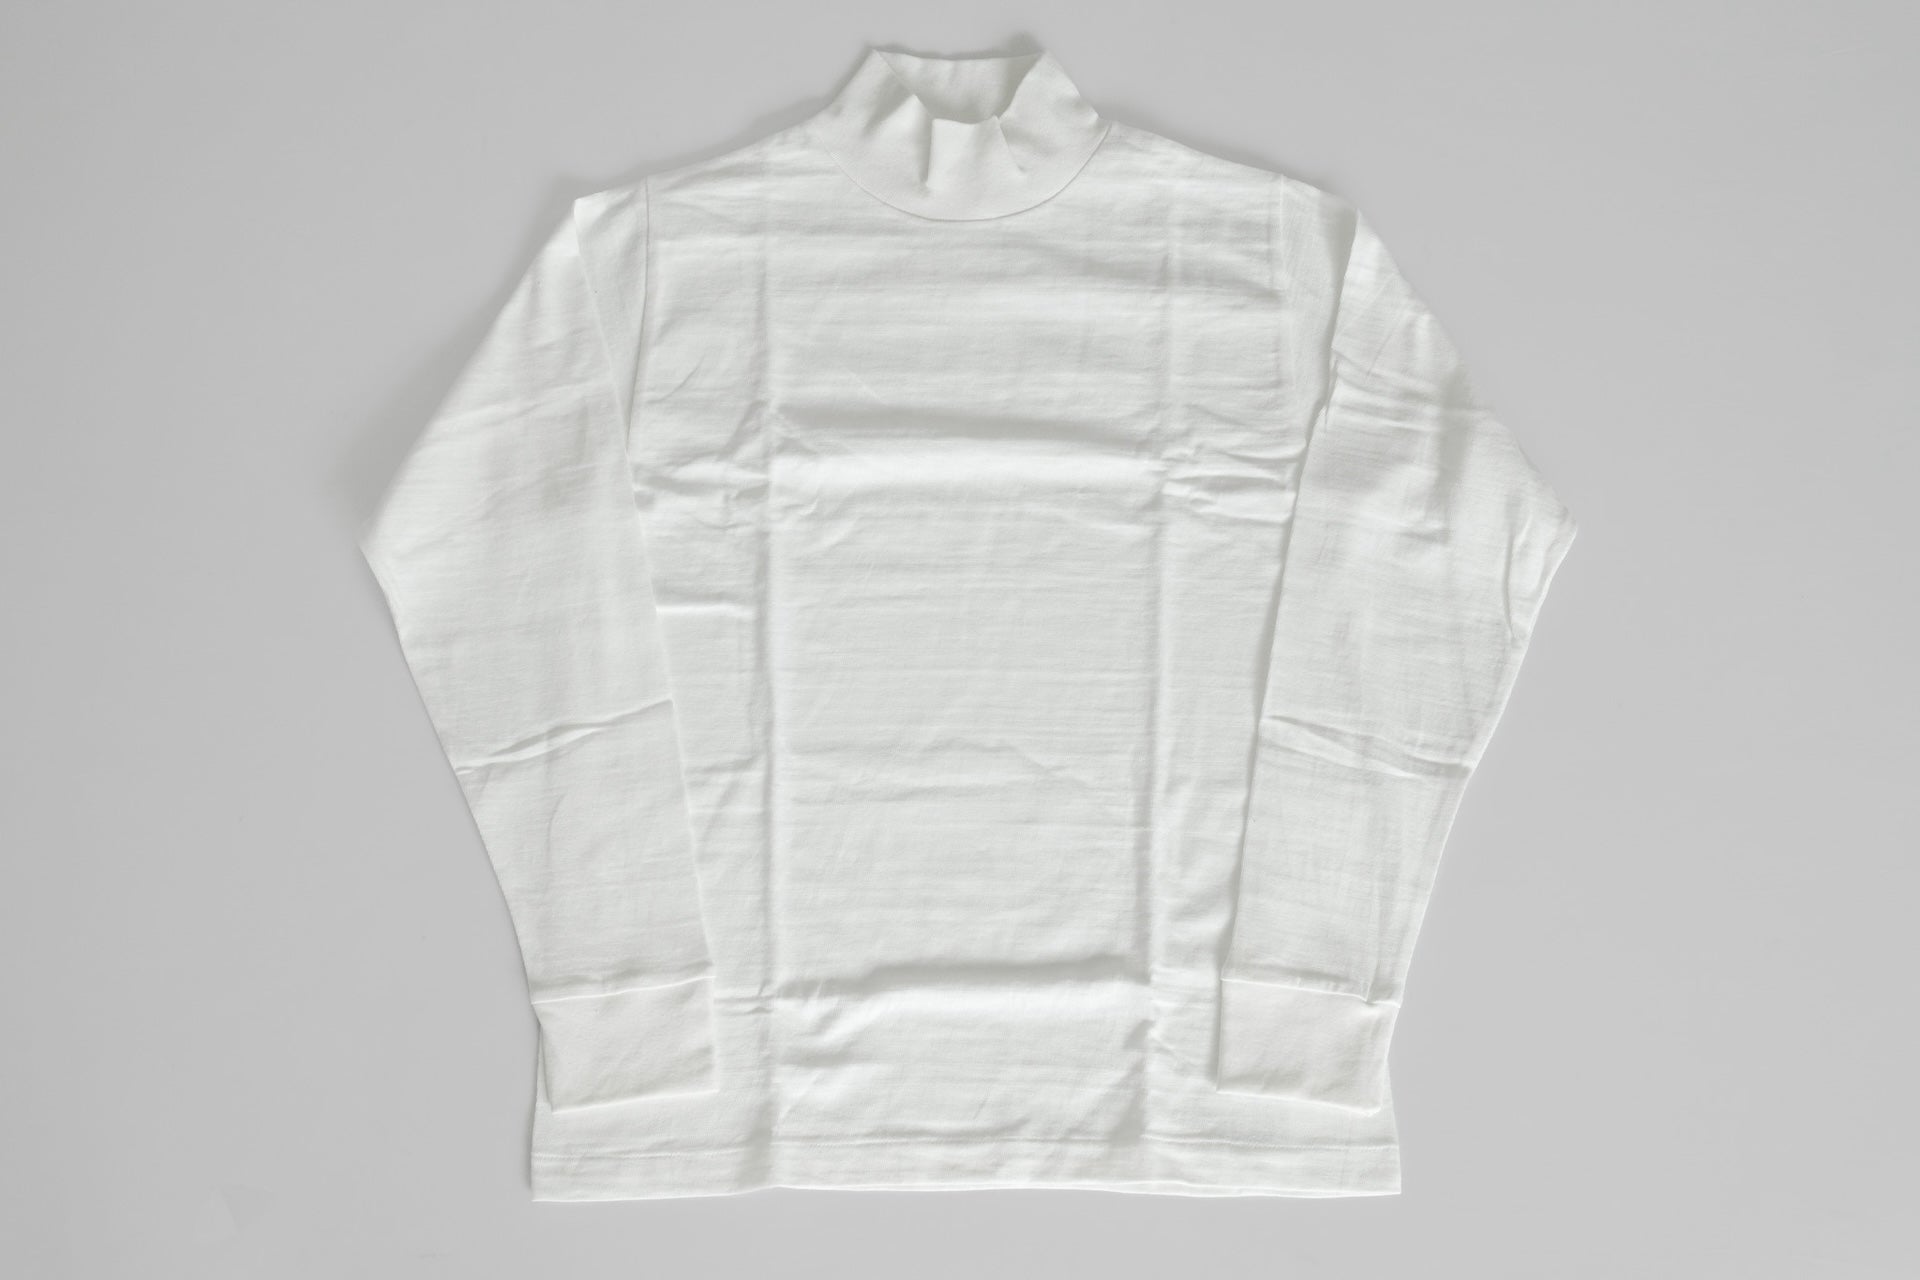 Warehouse 5.5oz "Bamboo Textured" L/S High Neck Tee (White)